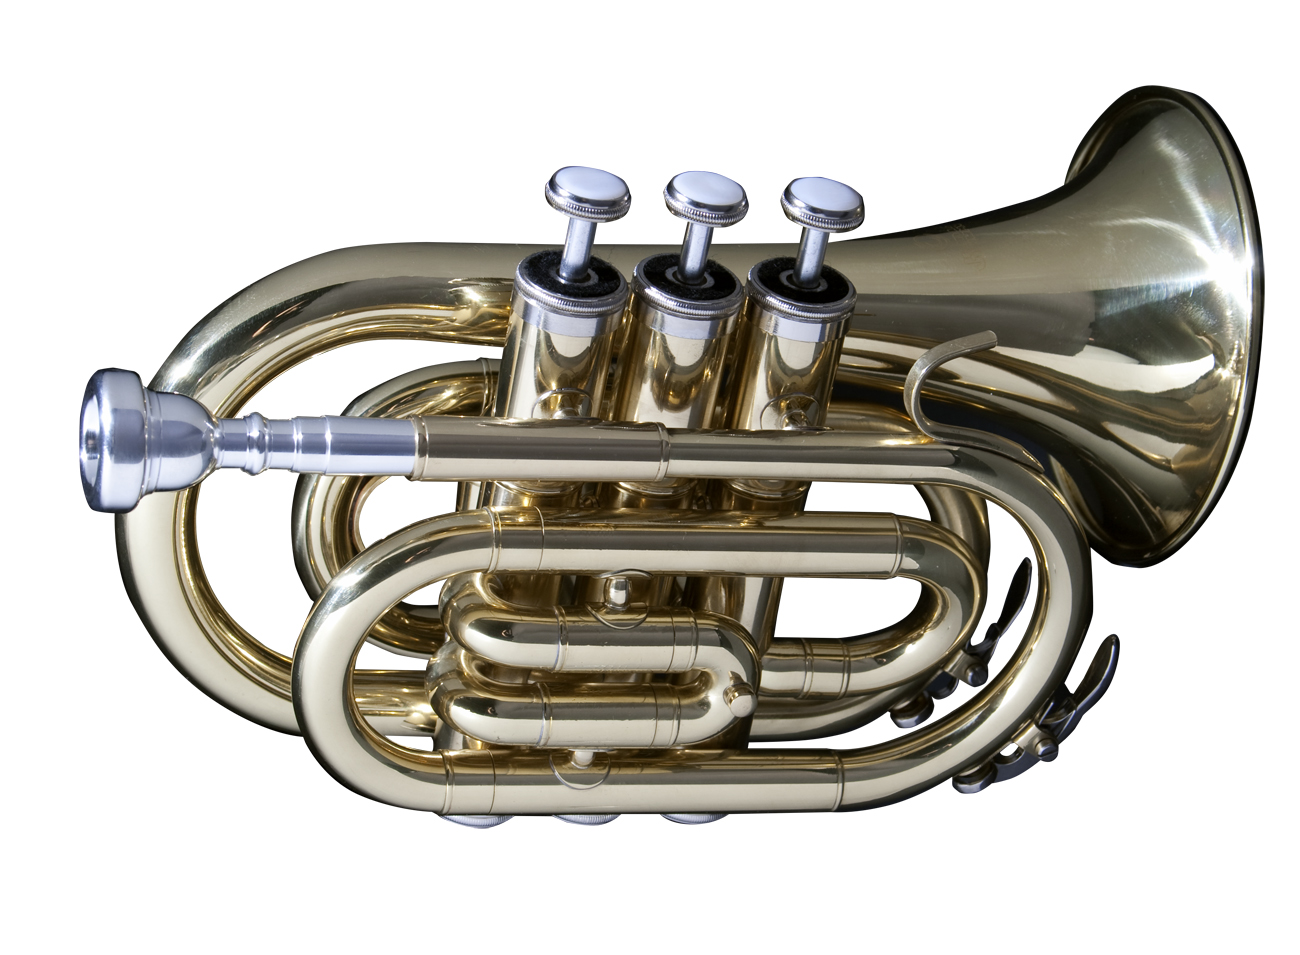 Monzani MZMT-500L Bb-Pocket Trumpet Brass, Lacquered | MUSIC STORE  professional